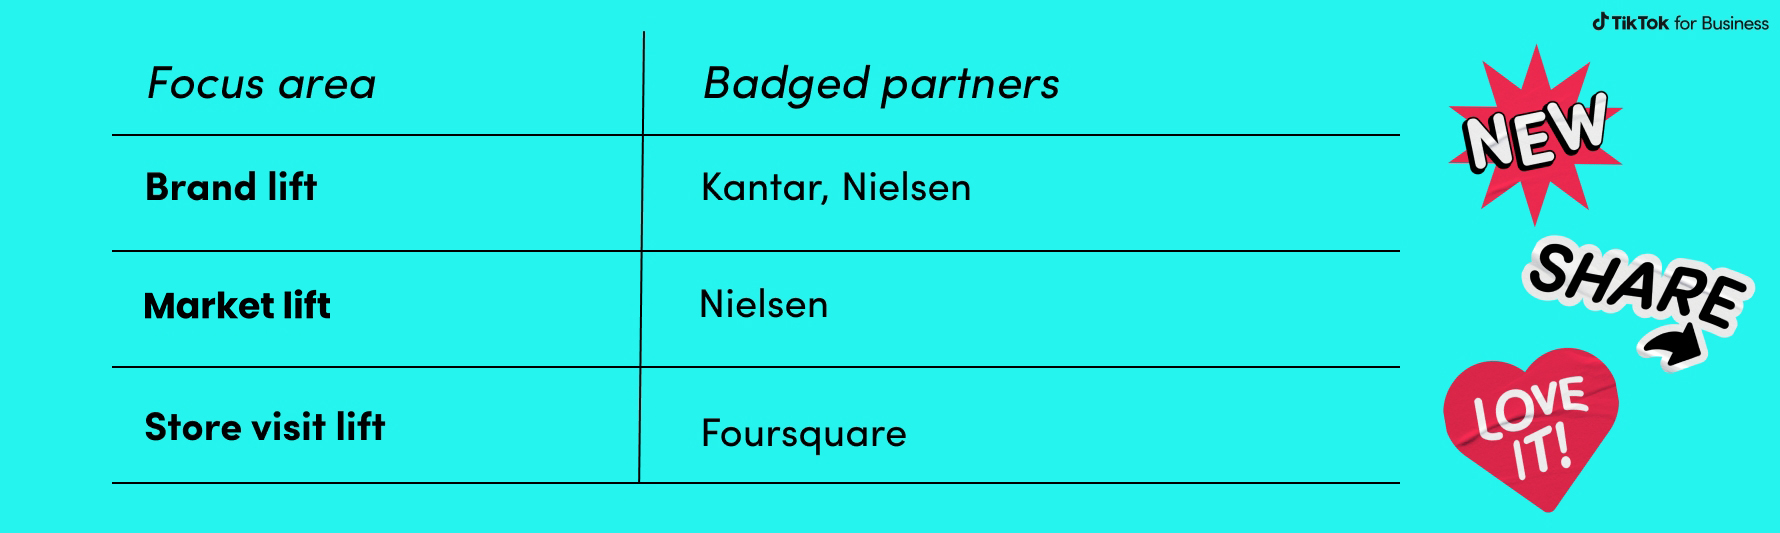 CA Badged Partners 2